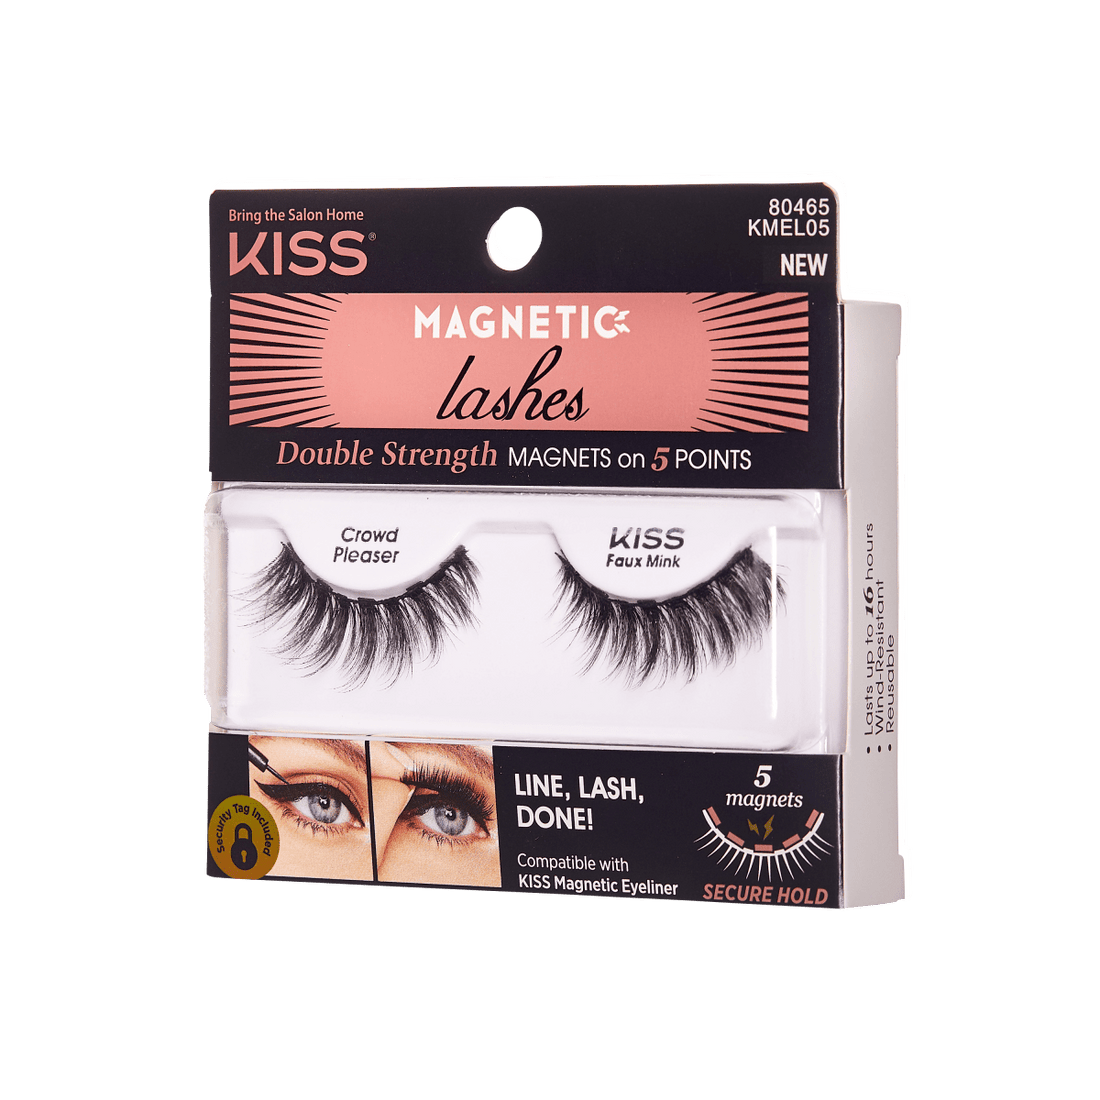 KISS Magnetic Lashes - Crowd Pleaser